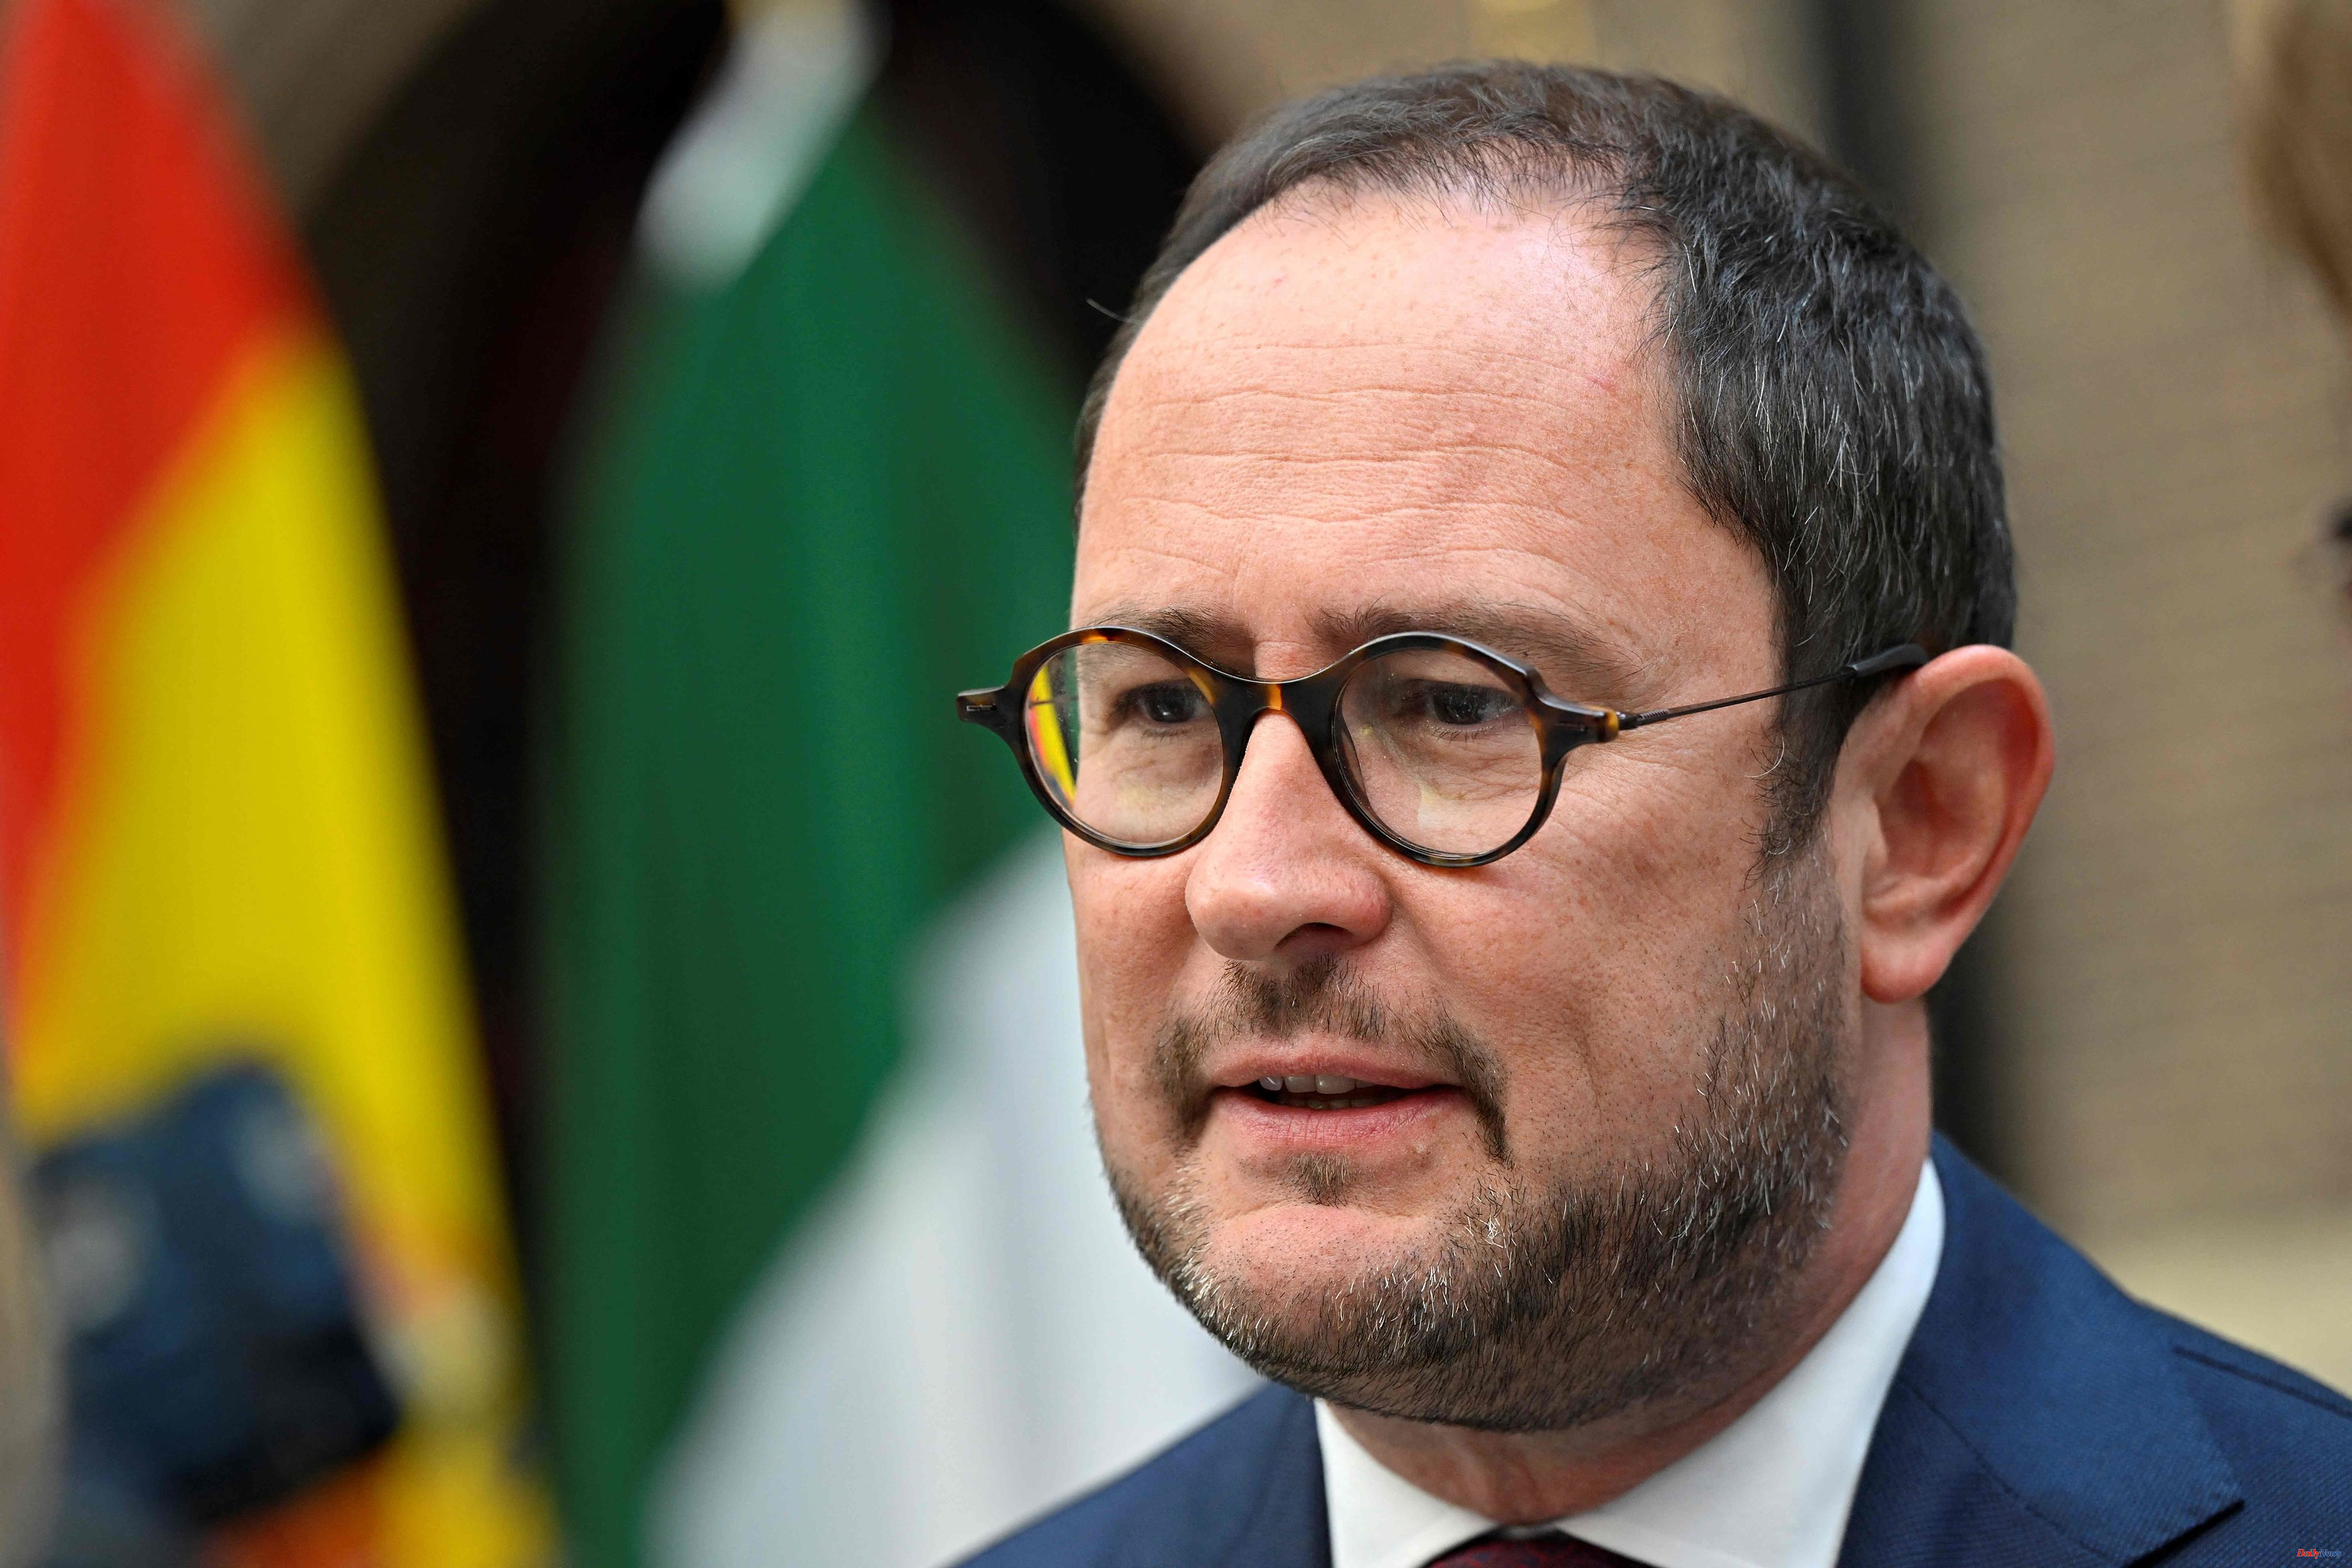 Politics The Belgian Minister of Justice resigns after admitting that the request for extradition to Tunisia of the terrorist who killed two Swedes was not processed